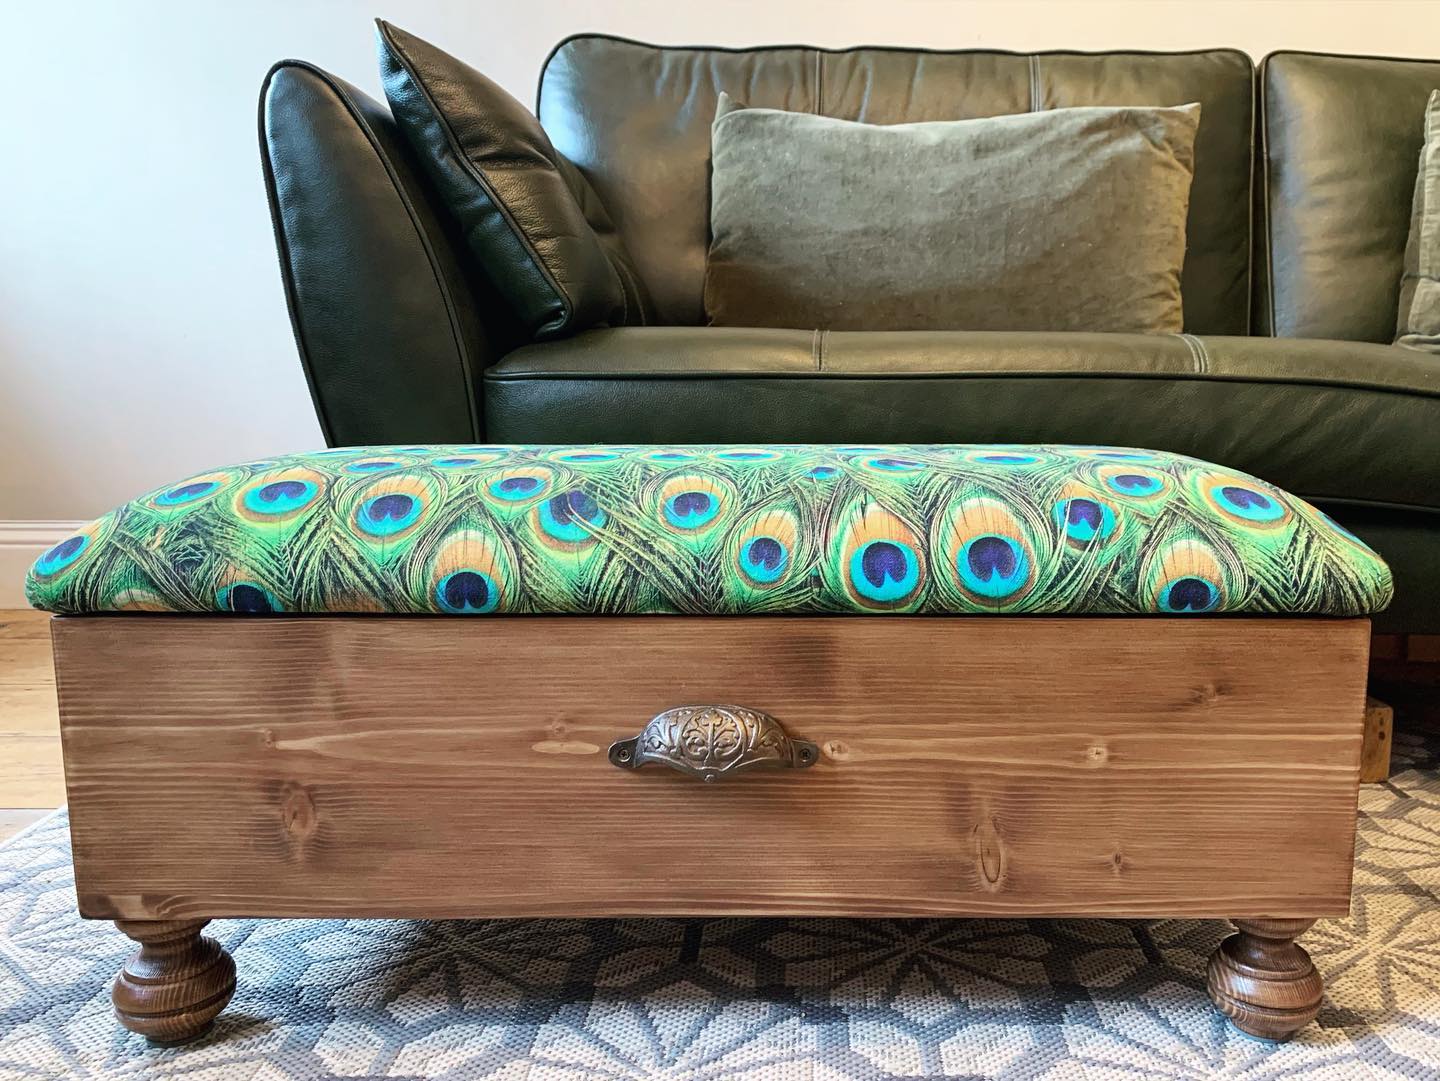 This bespoke blanket box is settling in nicely to its new home ? ...#bespoke #handcrafted #homedecor #home #peacock #beautifulprints #fabric #textiles #interiordesignideas #storagesolutions #livingroomdecor #blanketbox #woodworking #gingerandtweed